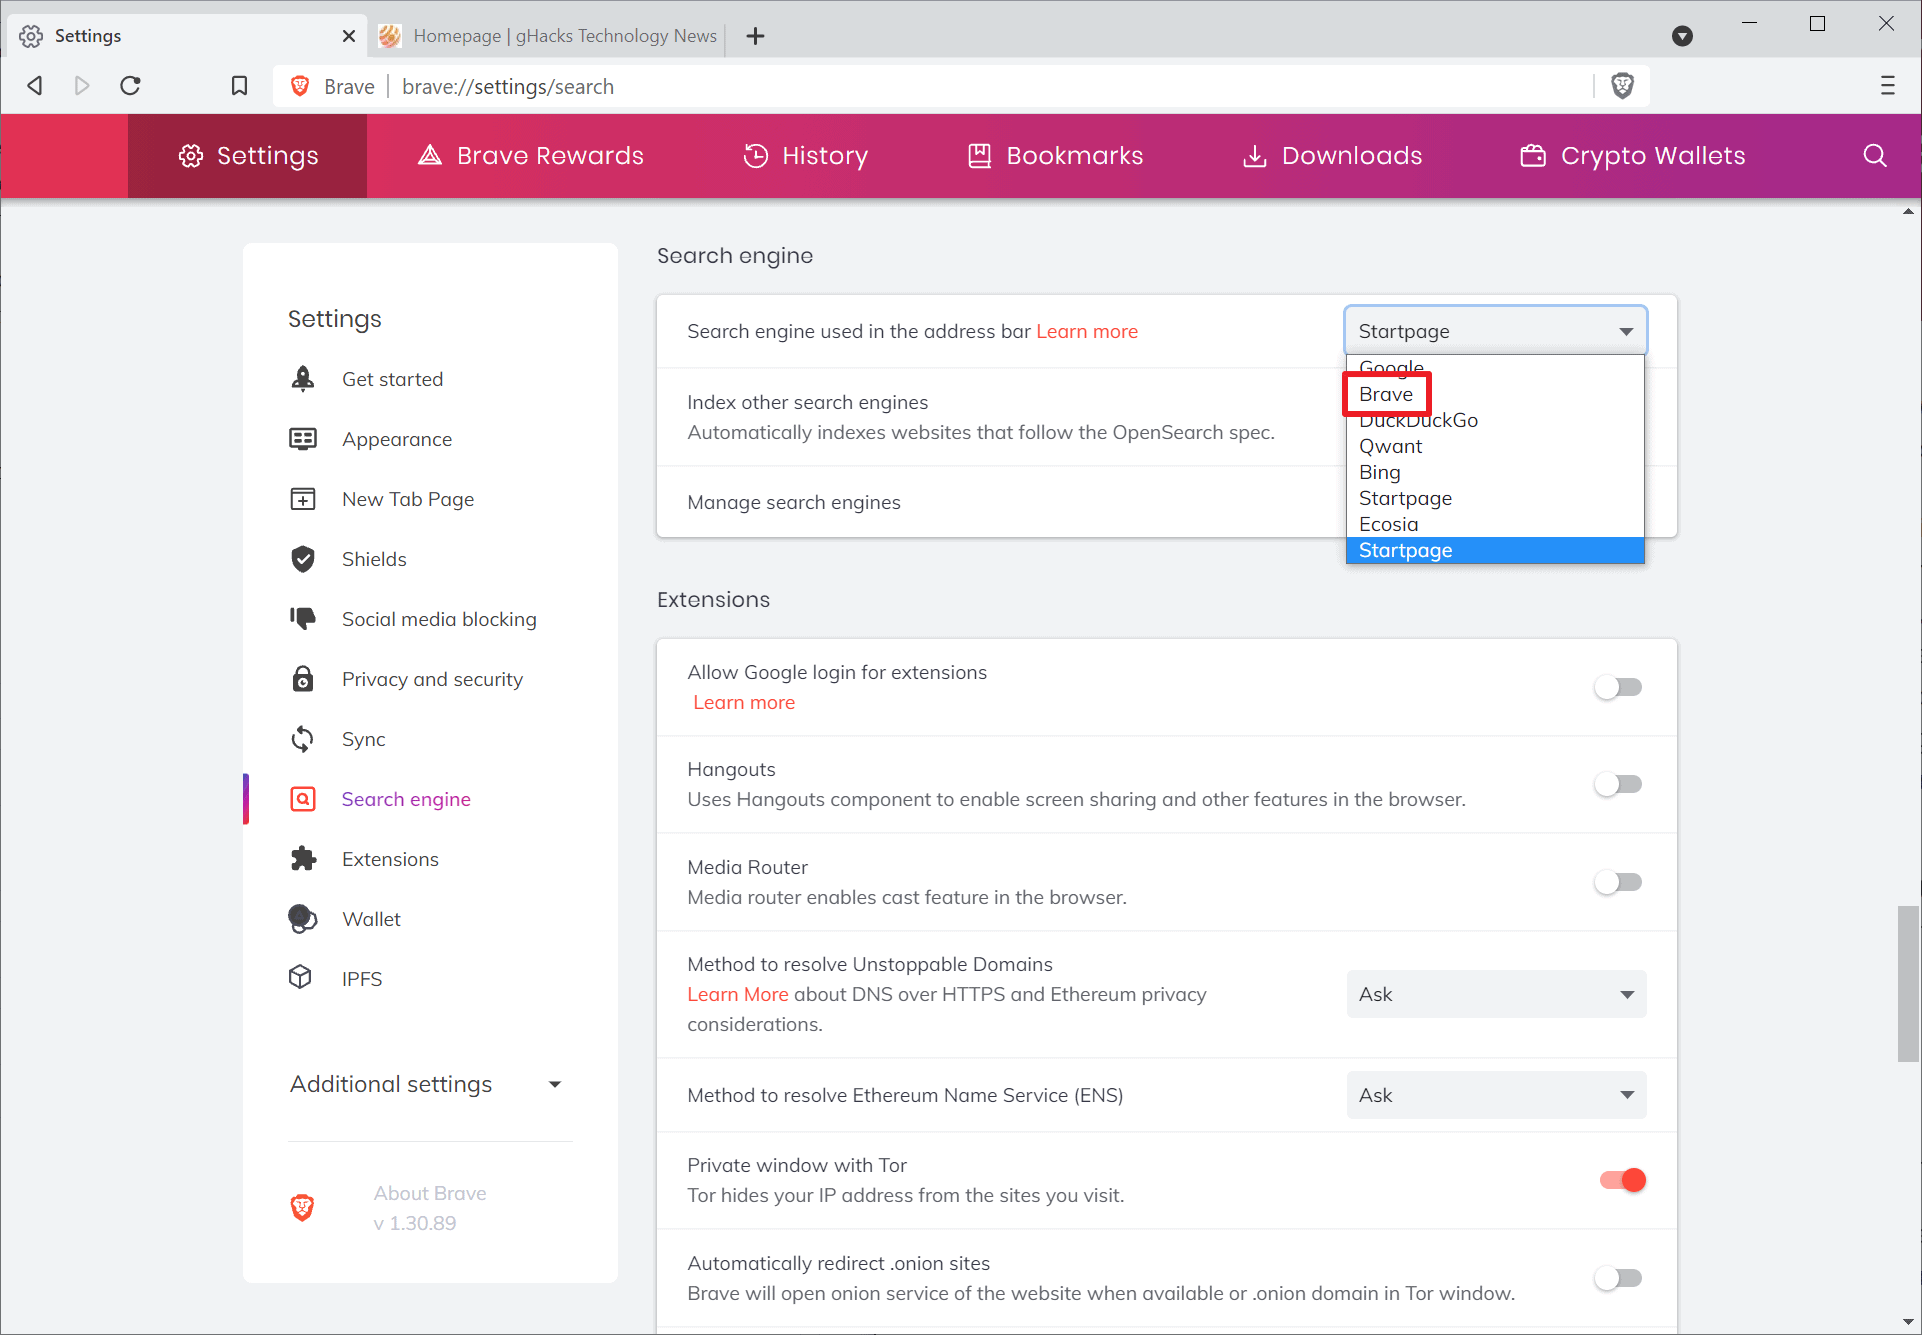 Brave Search is now the default search engine for new users in 5 regions in Brave Browser